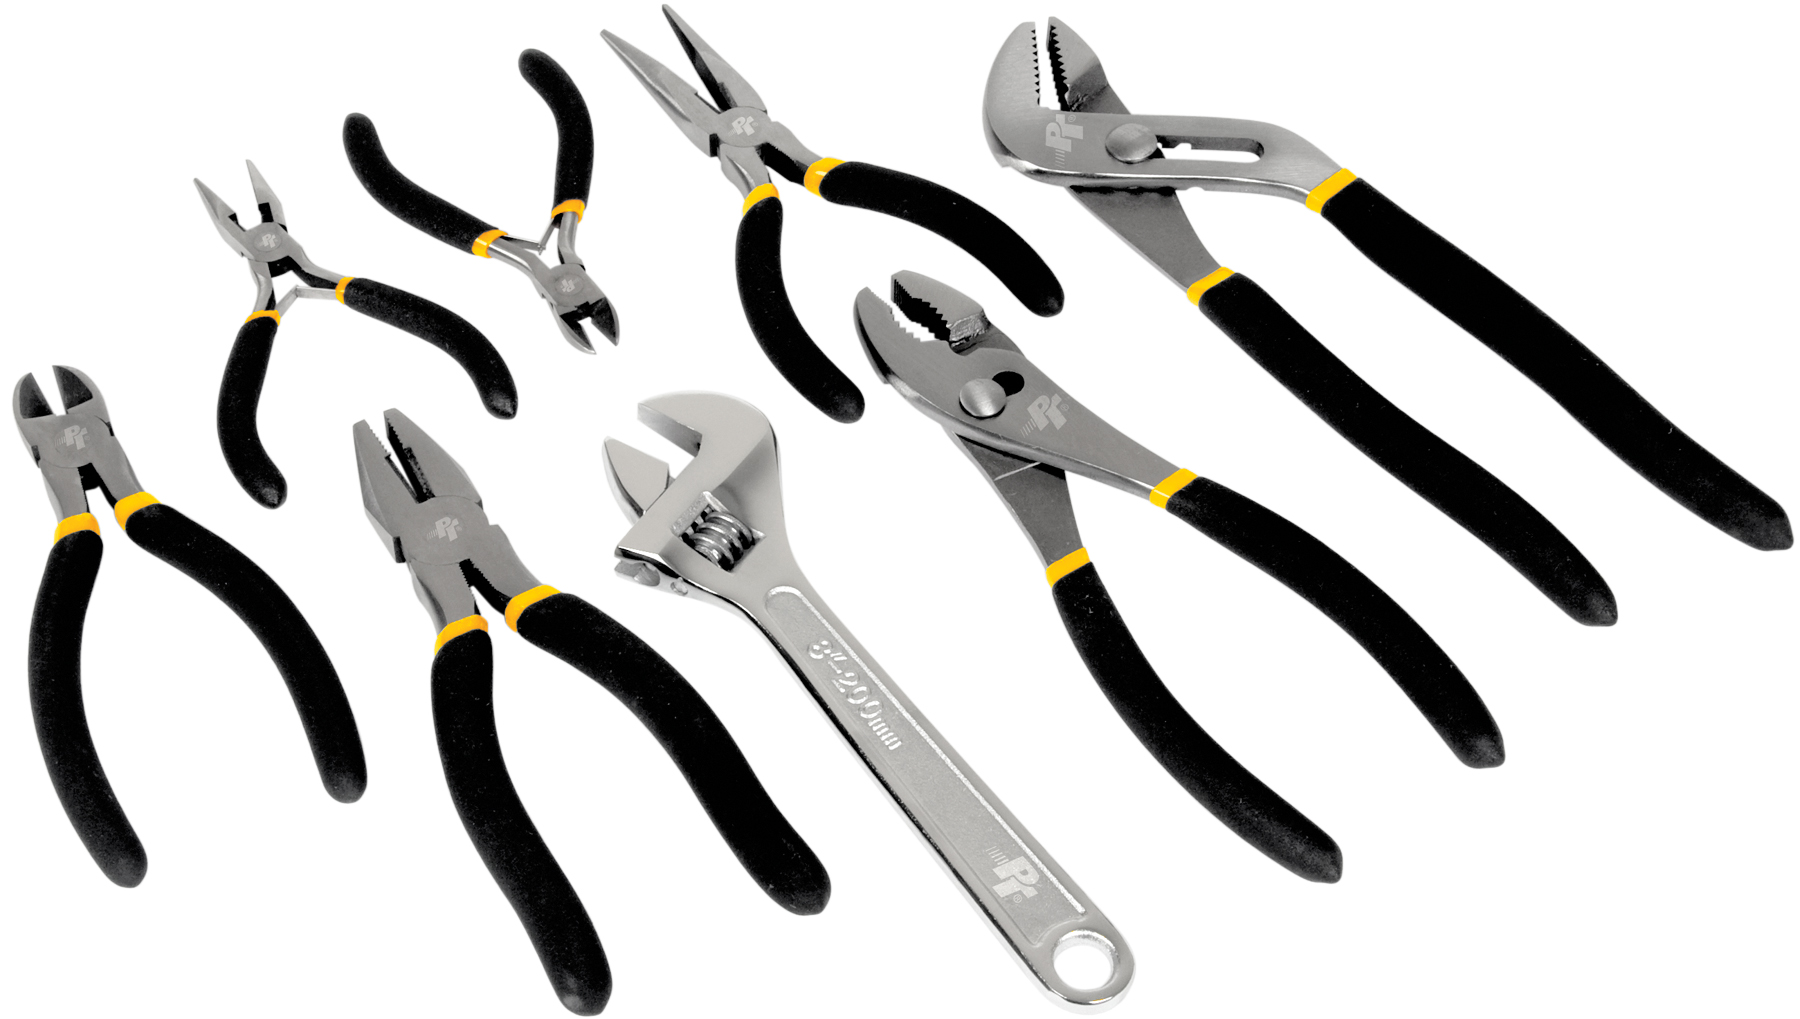 Performance Tools PTW1704 8 PIECE PLIERS AND WRENCH SET - MPR Tools & Equipment